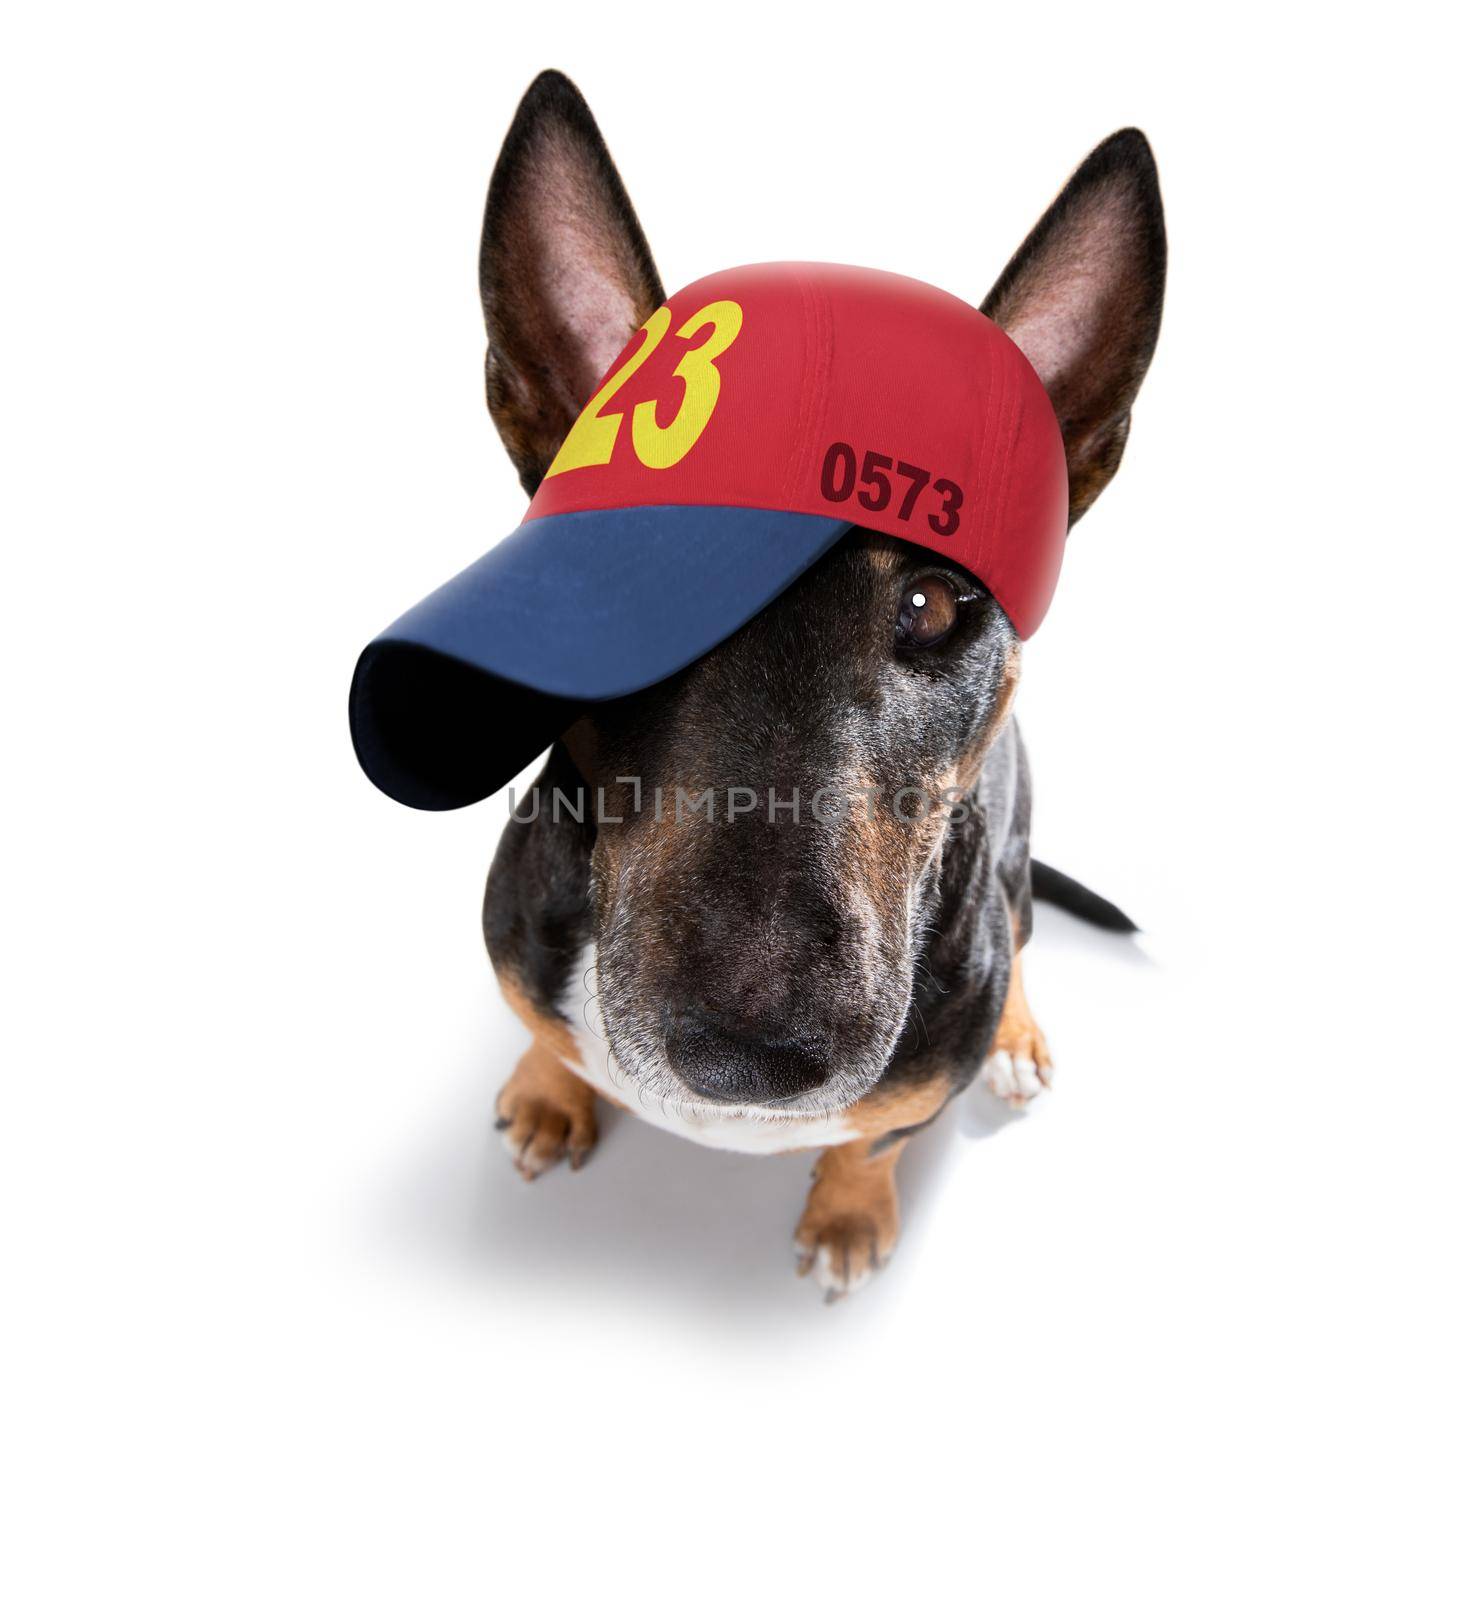 cool casual look bull terrier dog wearing a baseball cap or hat , sporty and fit , isolated on white background